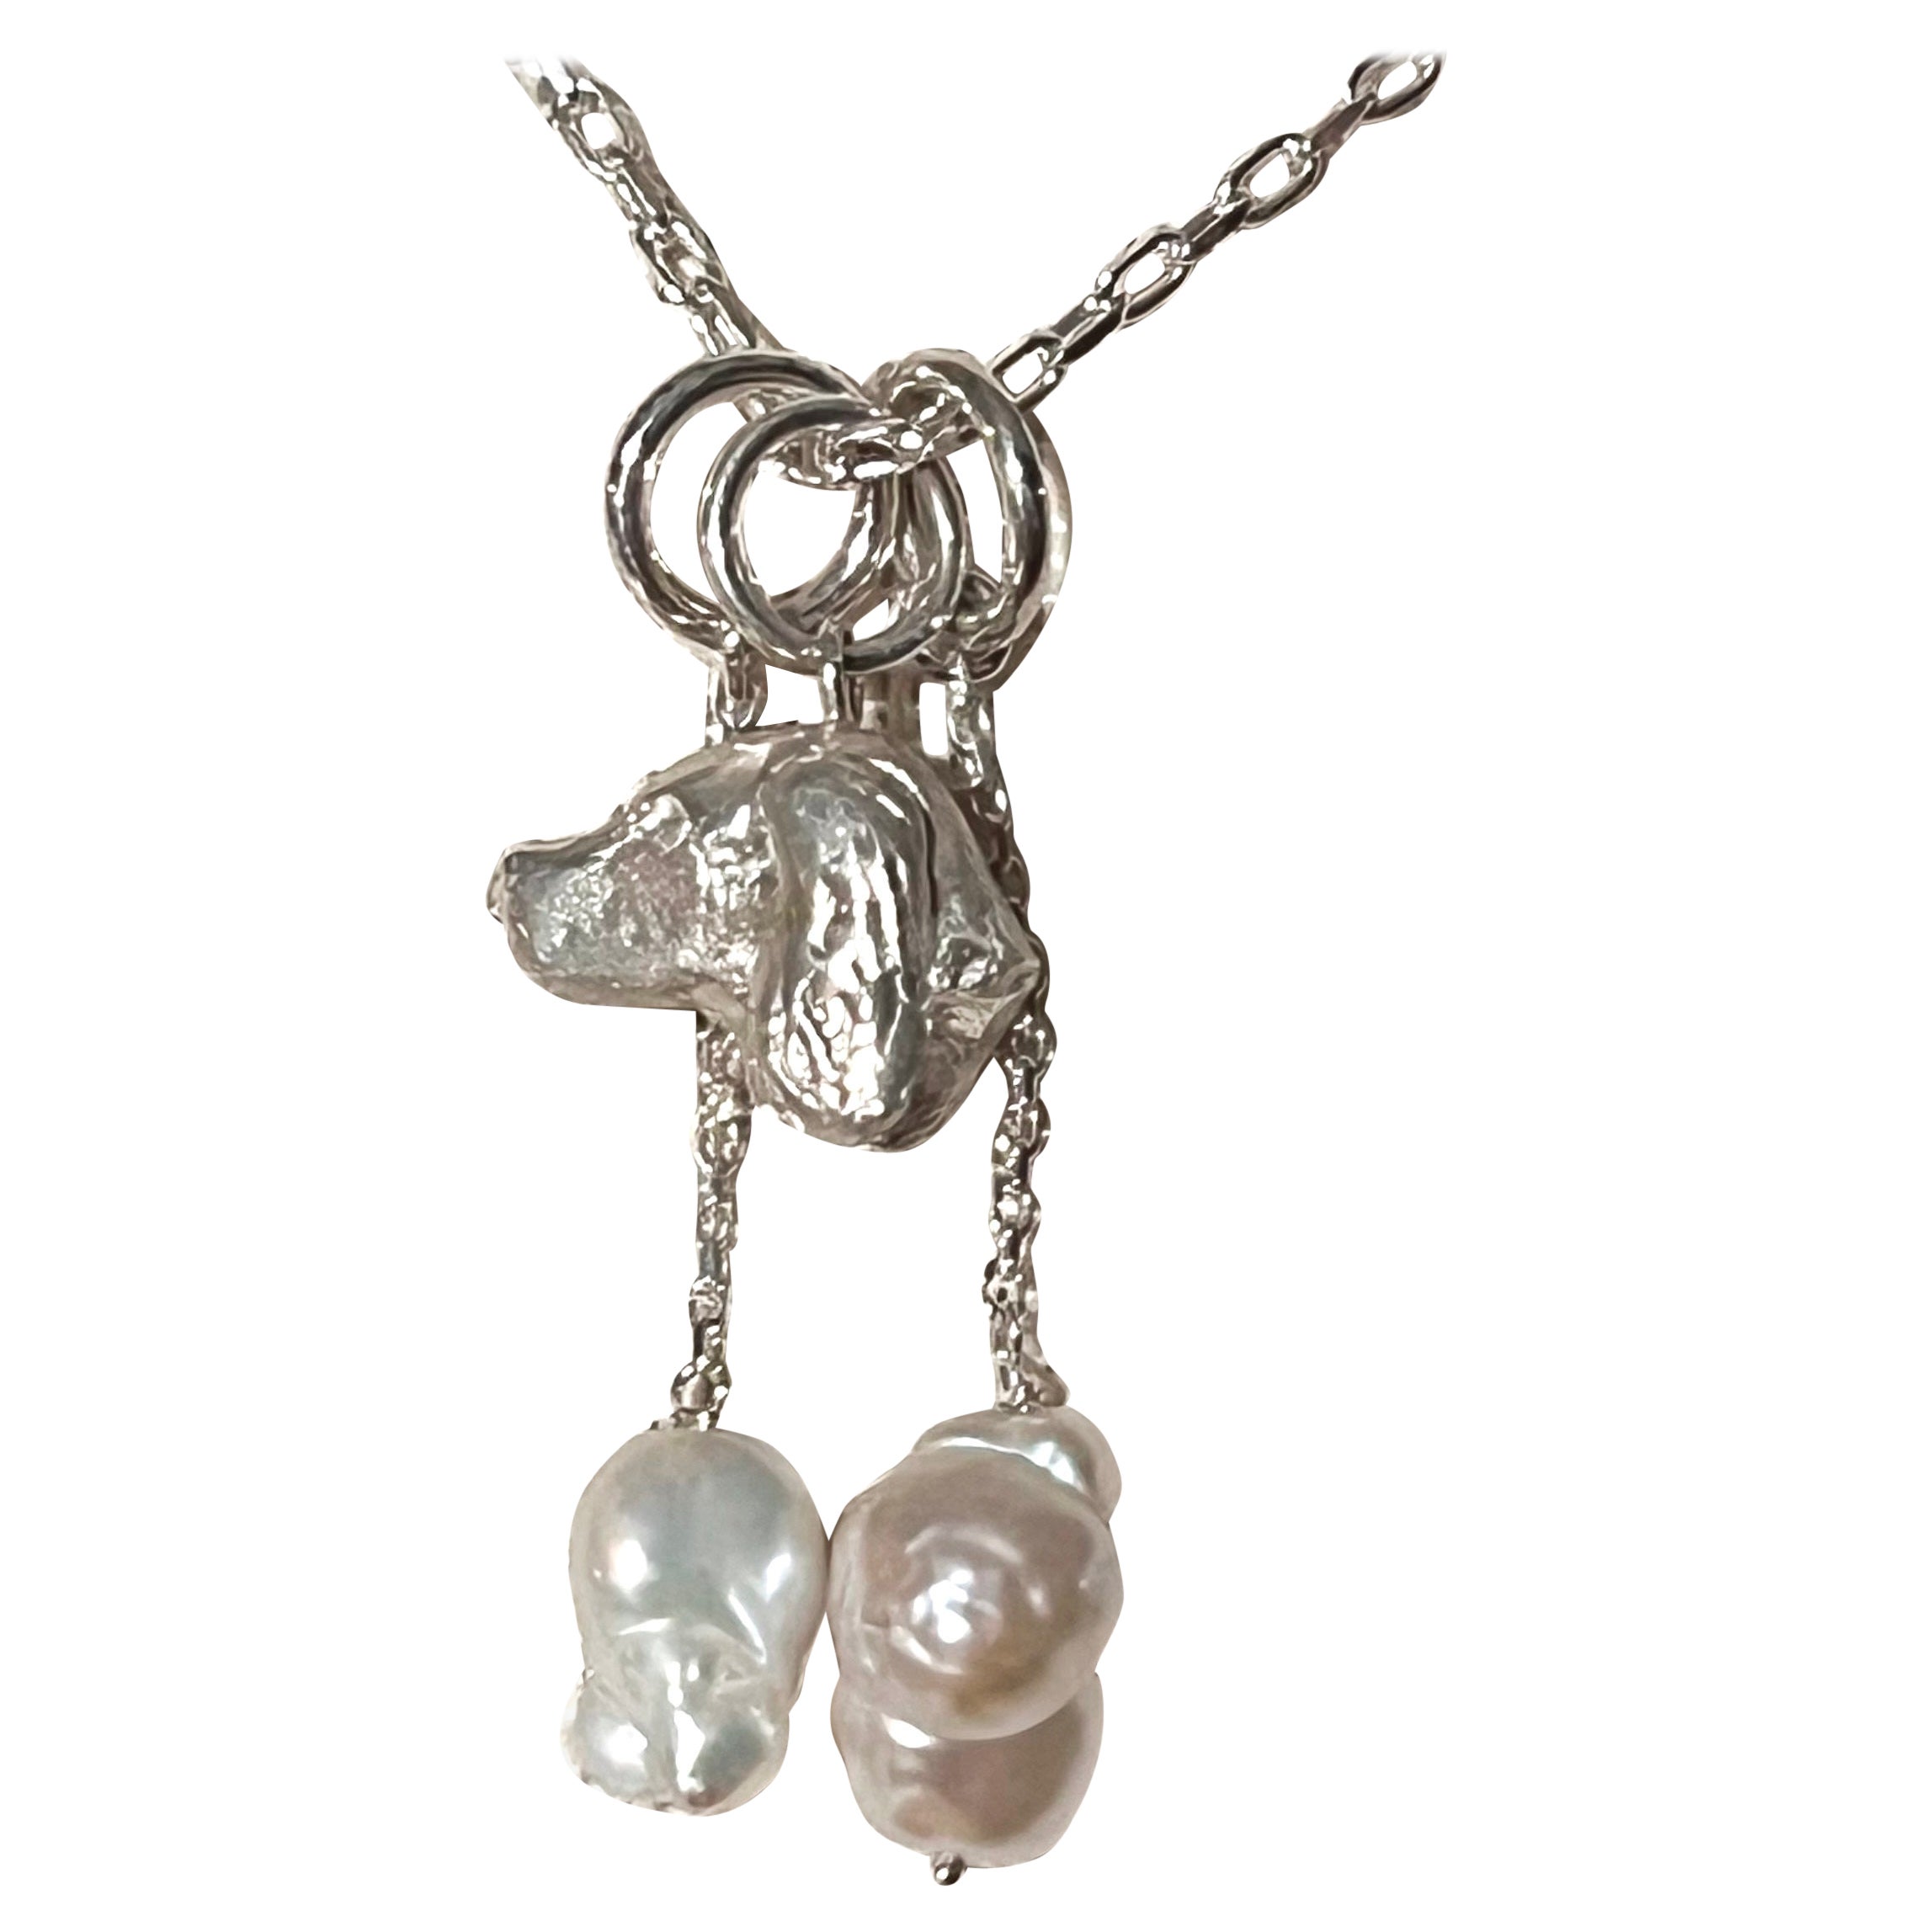 Paul Eaton Sculpted Spaniel Dog Head Pendant with One or Two Pearl Drops